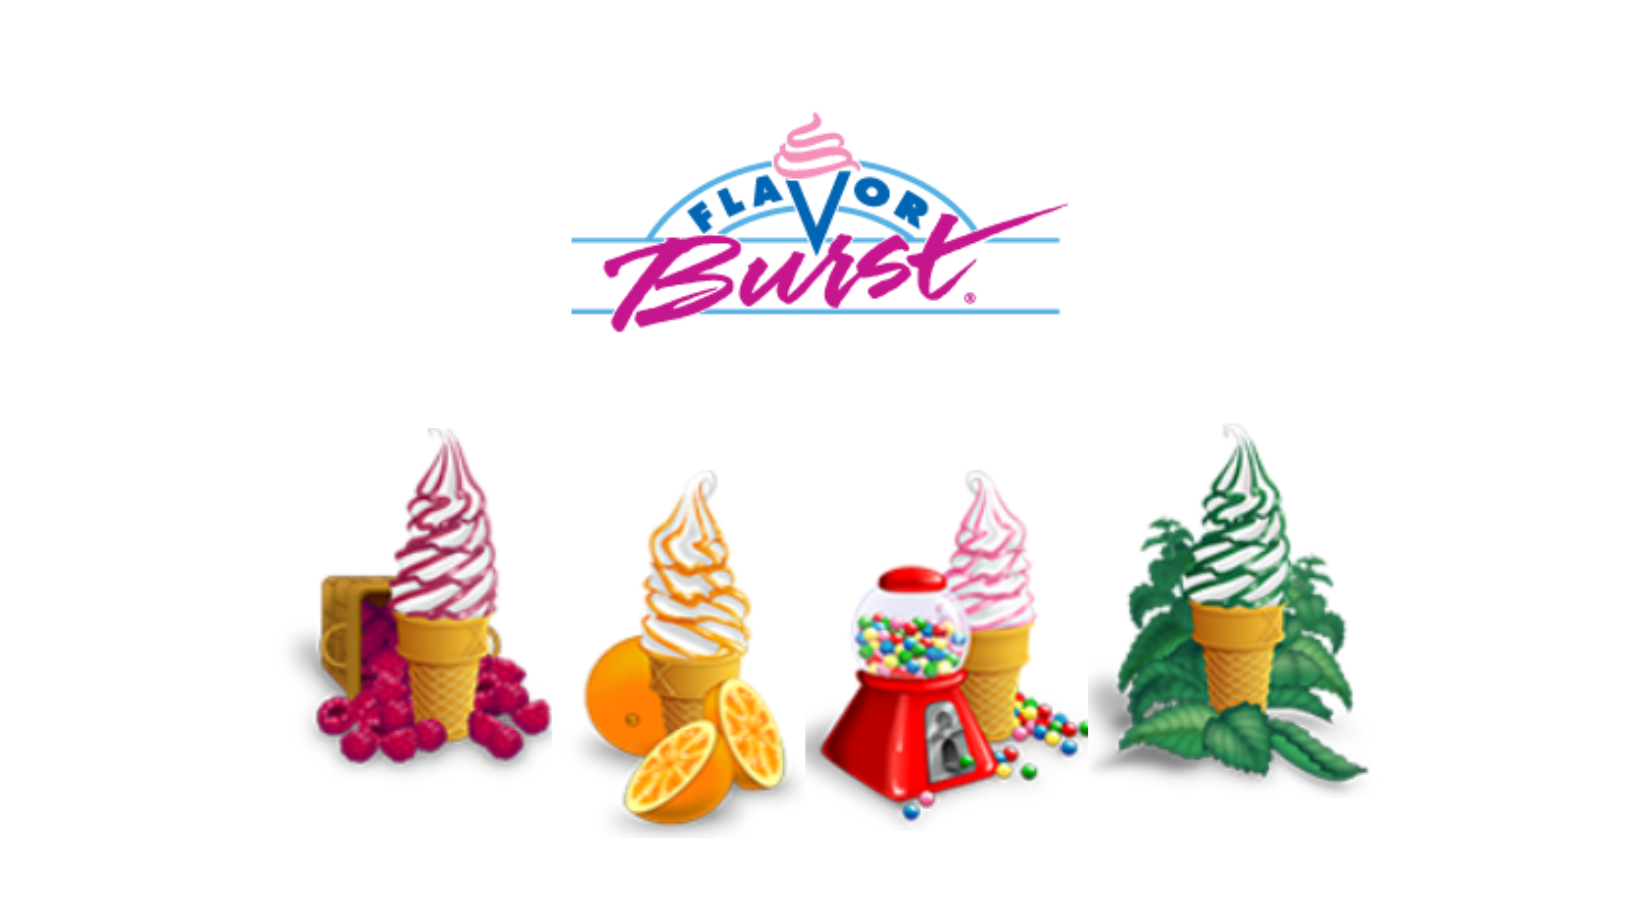 Soft Serve Flavors are Available with Flavor Burst